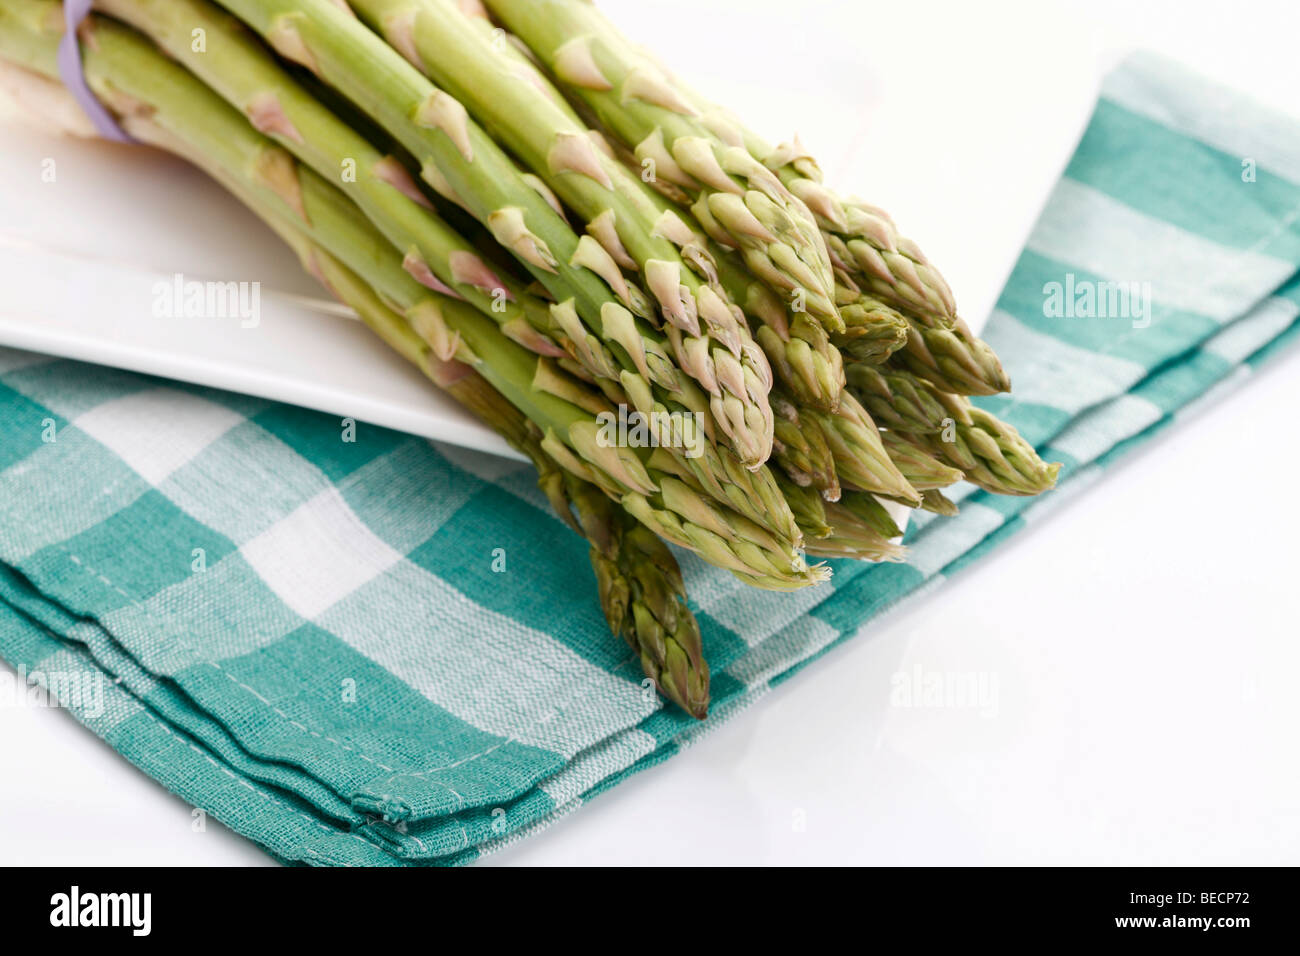 Bunch of green asparagus Stock Photo